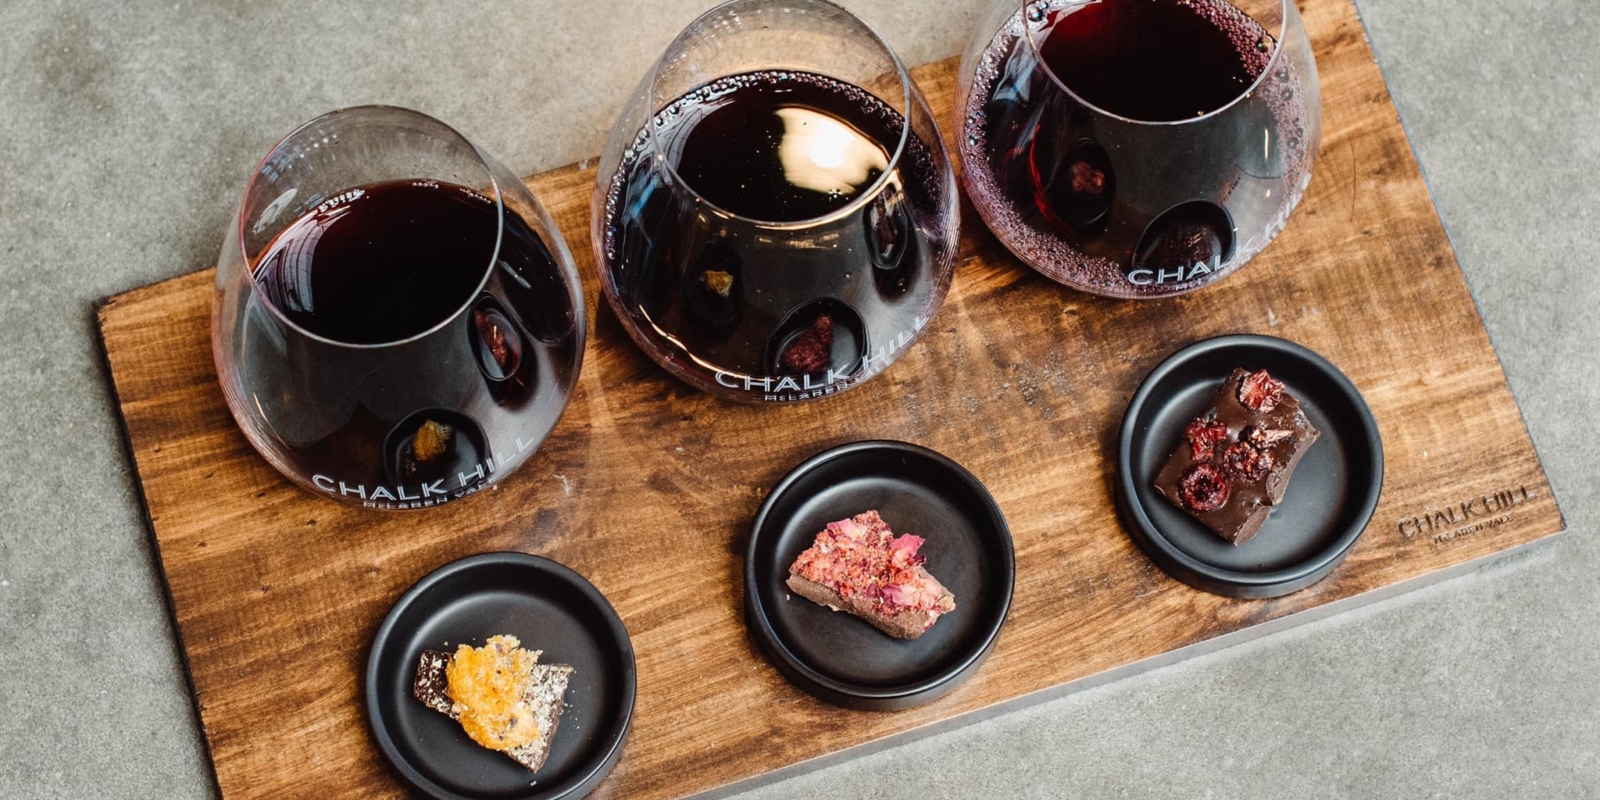 Chalk Hill Wines Chcolate Wine Tasting Experience